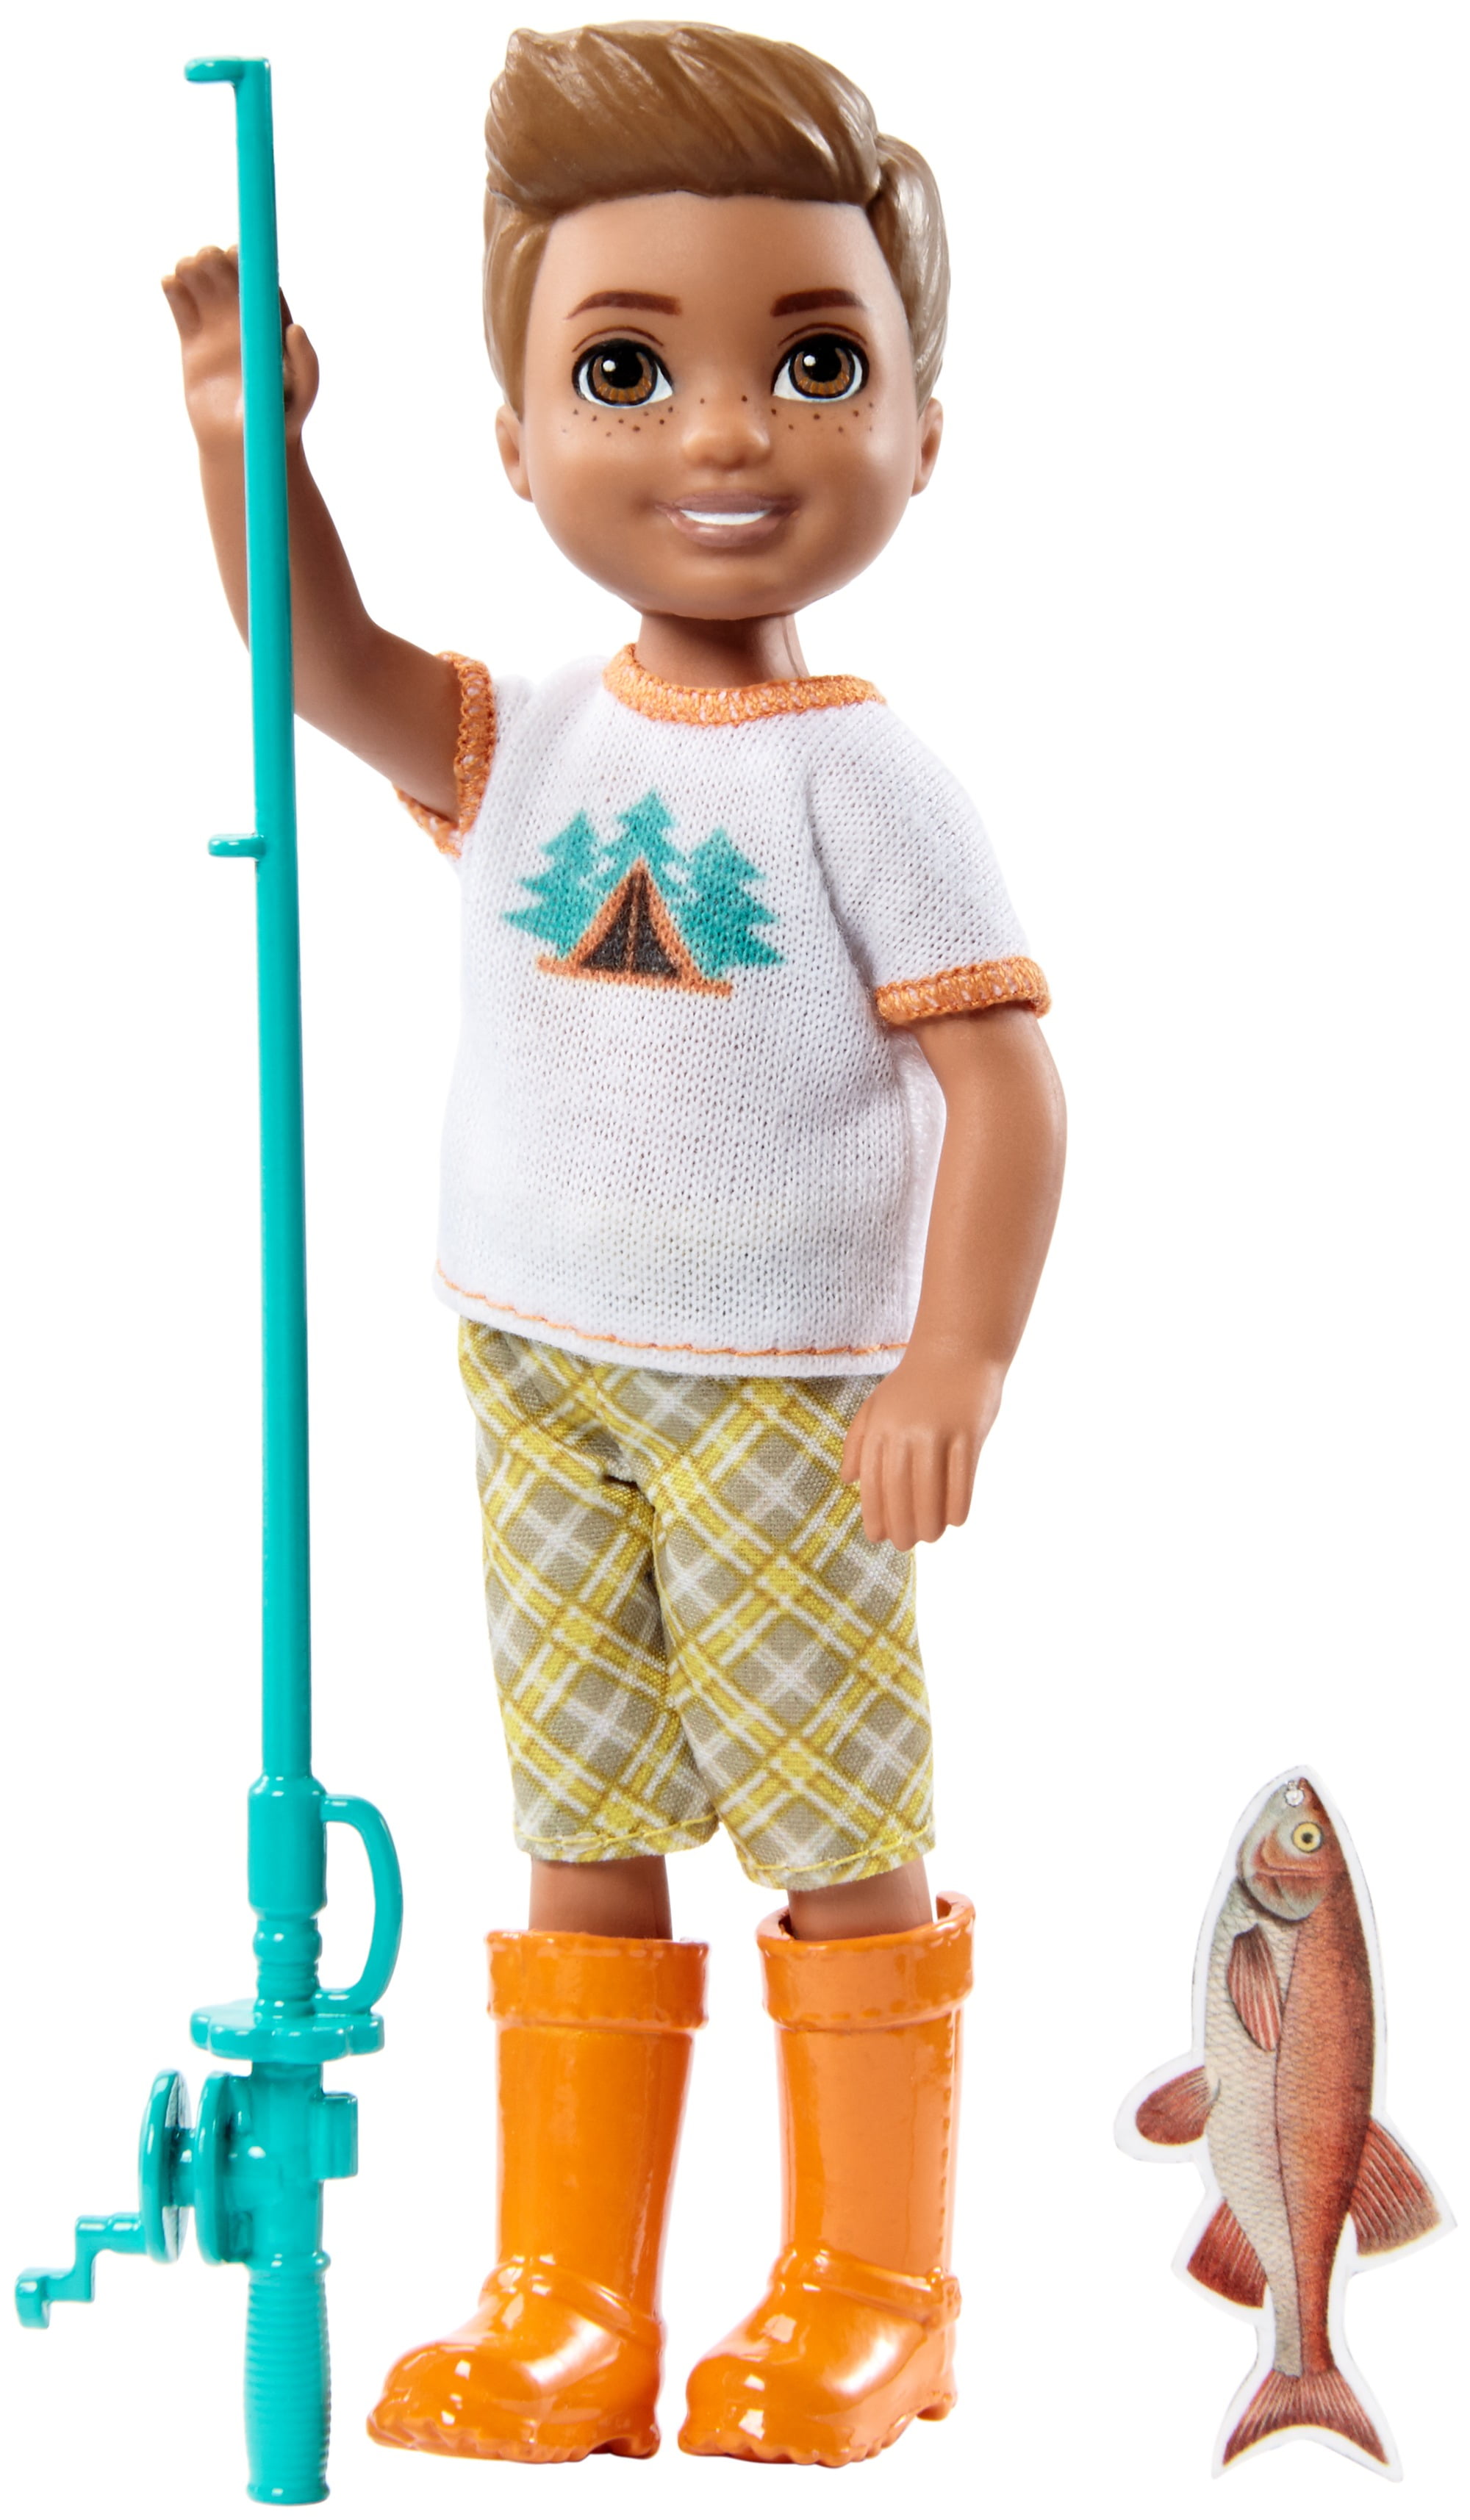 Barbie Camping Fun Boy Doll with Fishing-Themed Accessories - Walmart